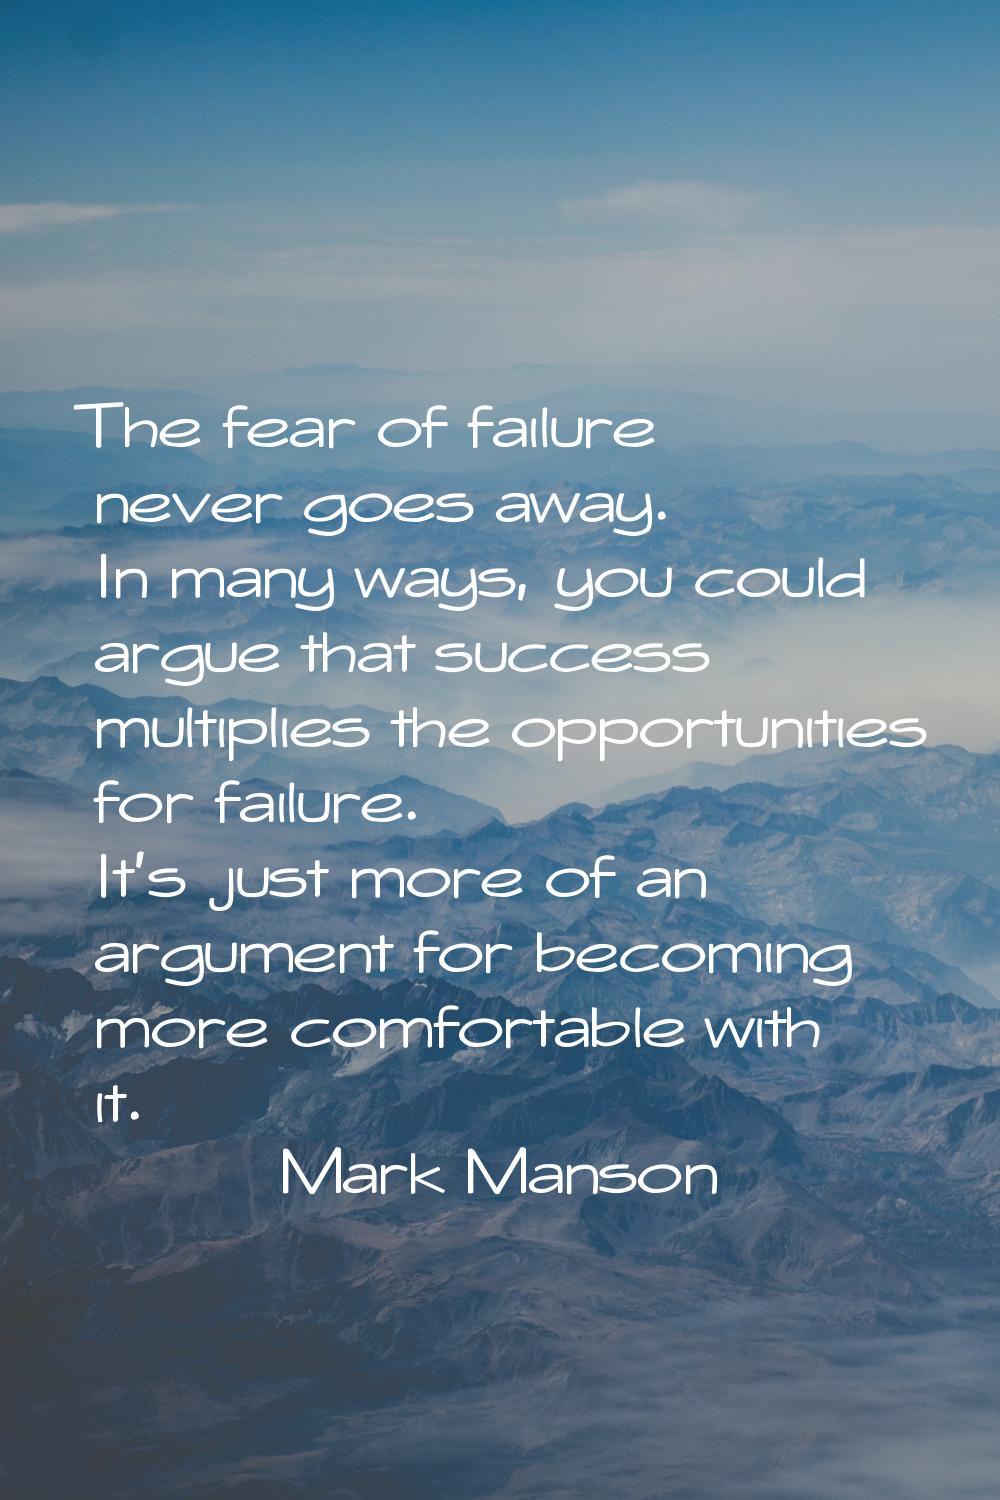 The fear of failure never goes away. In many ways, you could argue that success multiplies the oppo